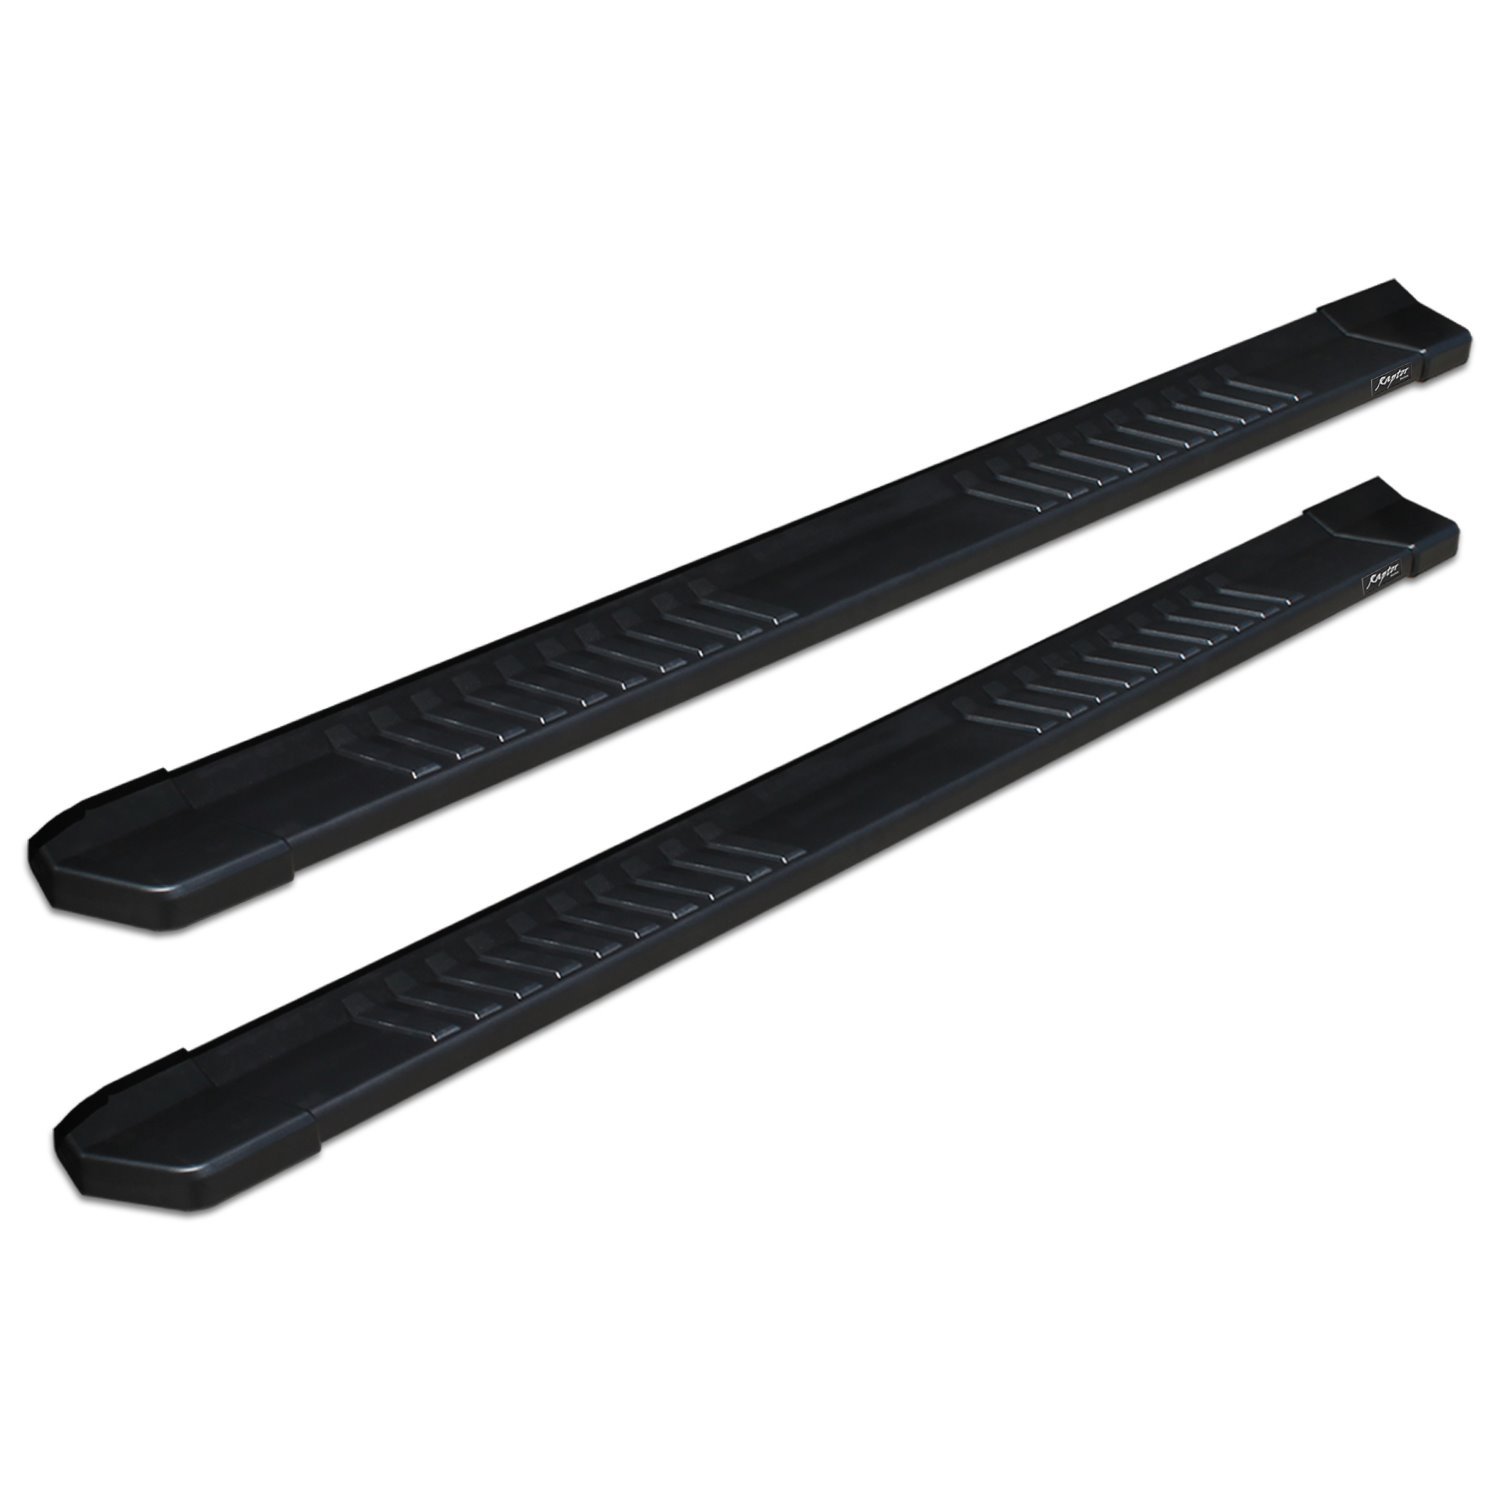 1701-0342BT 6 in OEM Style Slide Track Running Boards, Black Aluminum, Fits Select Chevy Colorado/GMC Canyon